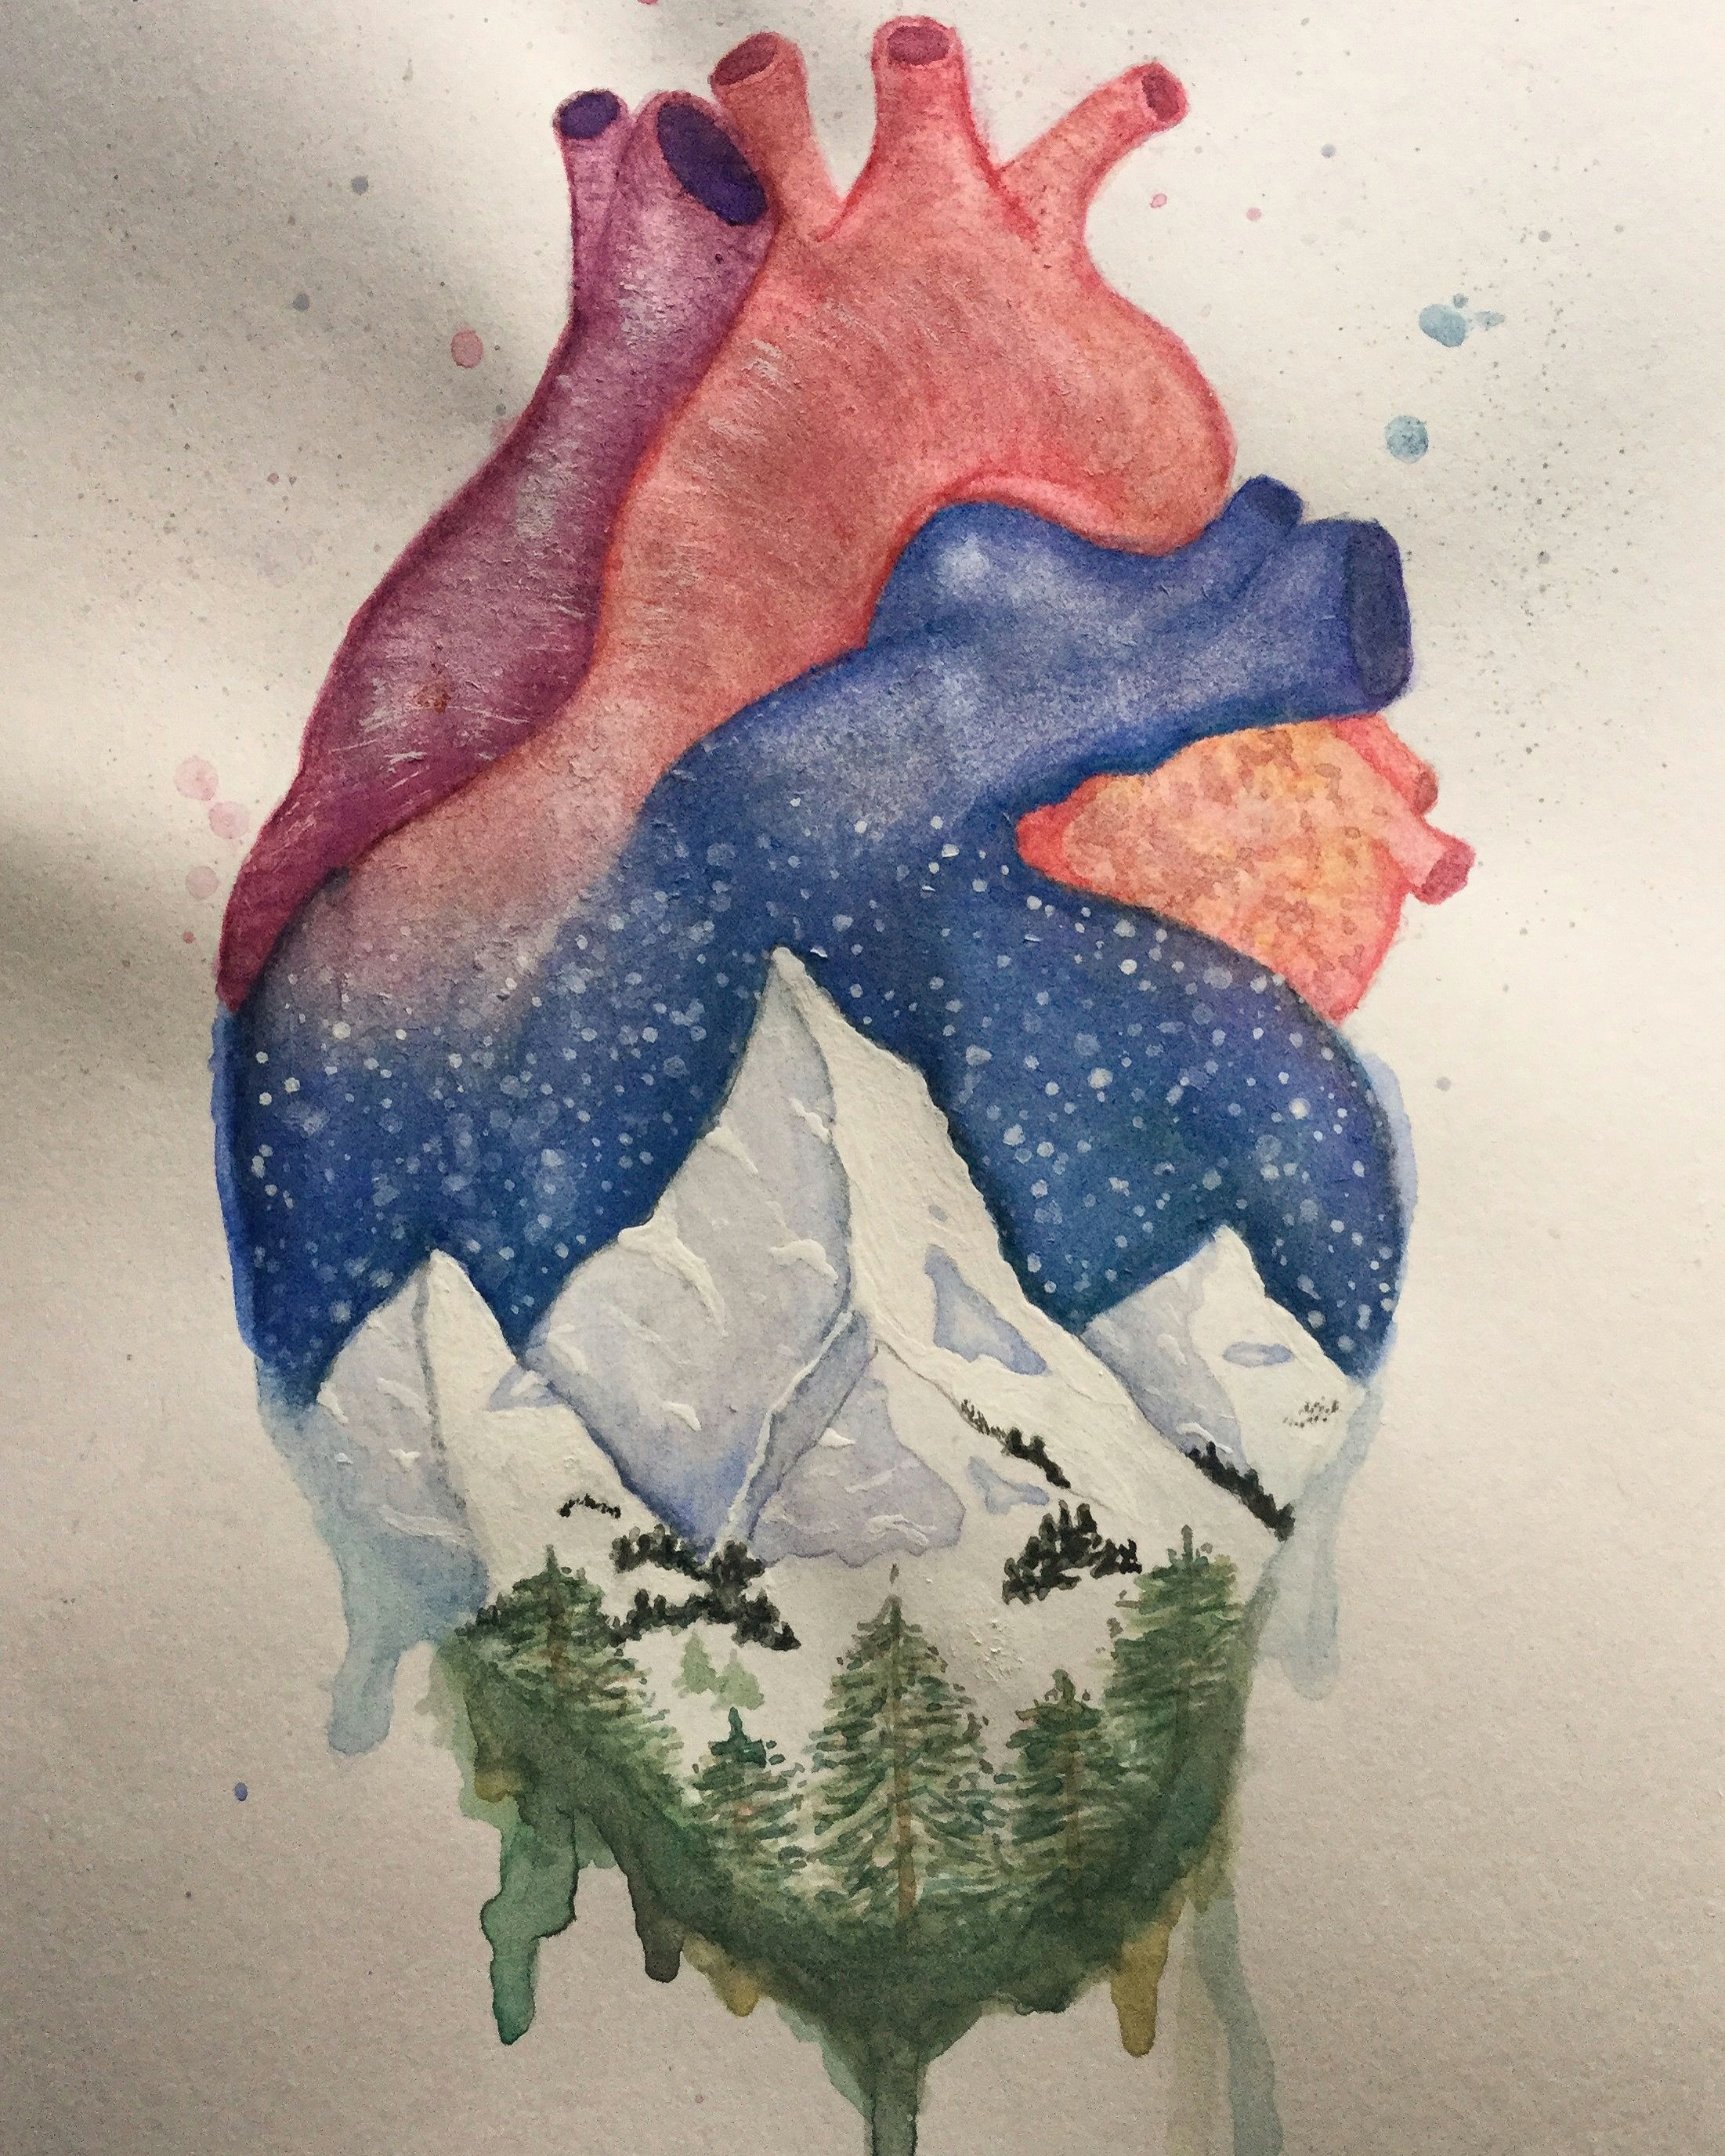 Drawing Of A Dissected Heart Anatomical Heart and Winter Mountain Landscape Watercolor Painting